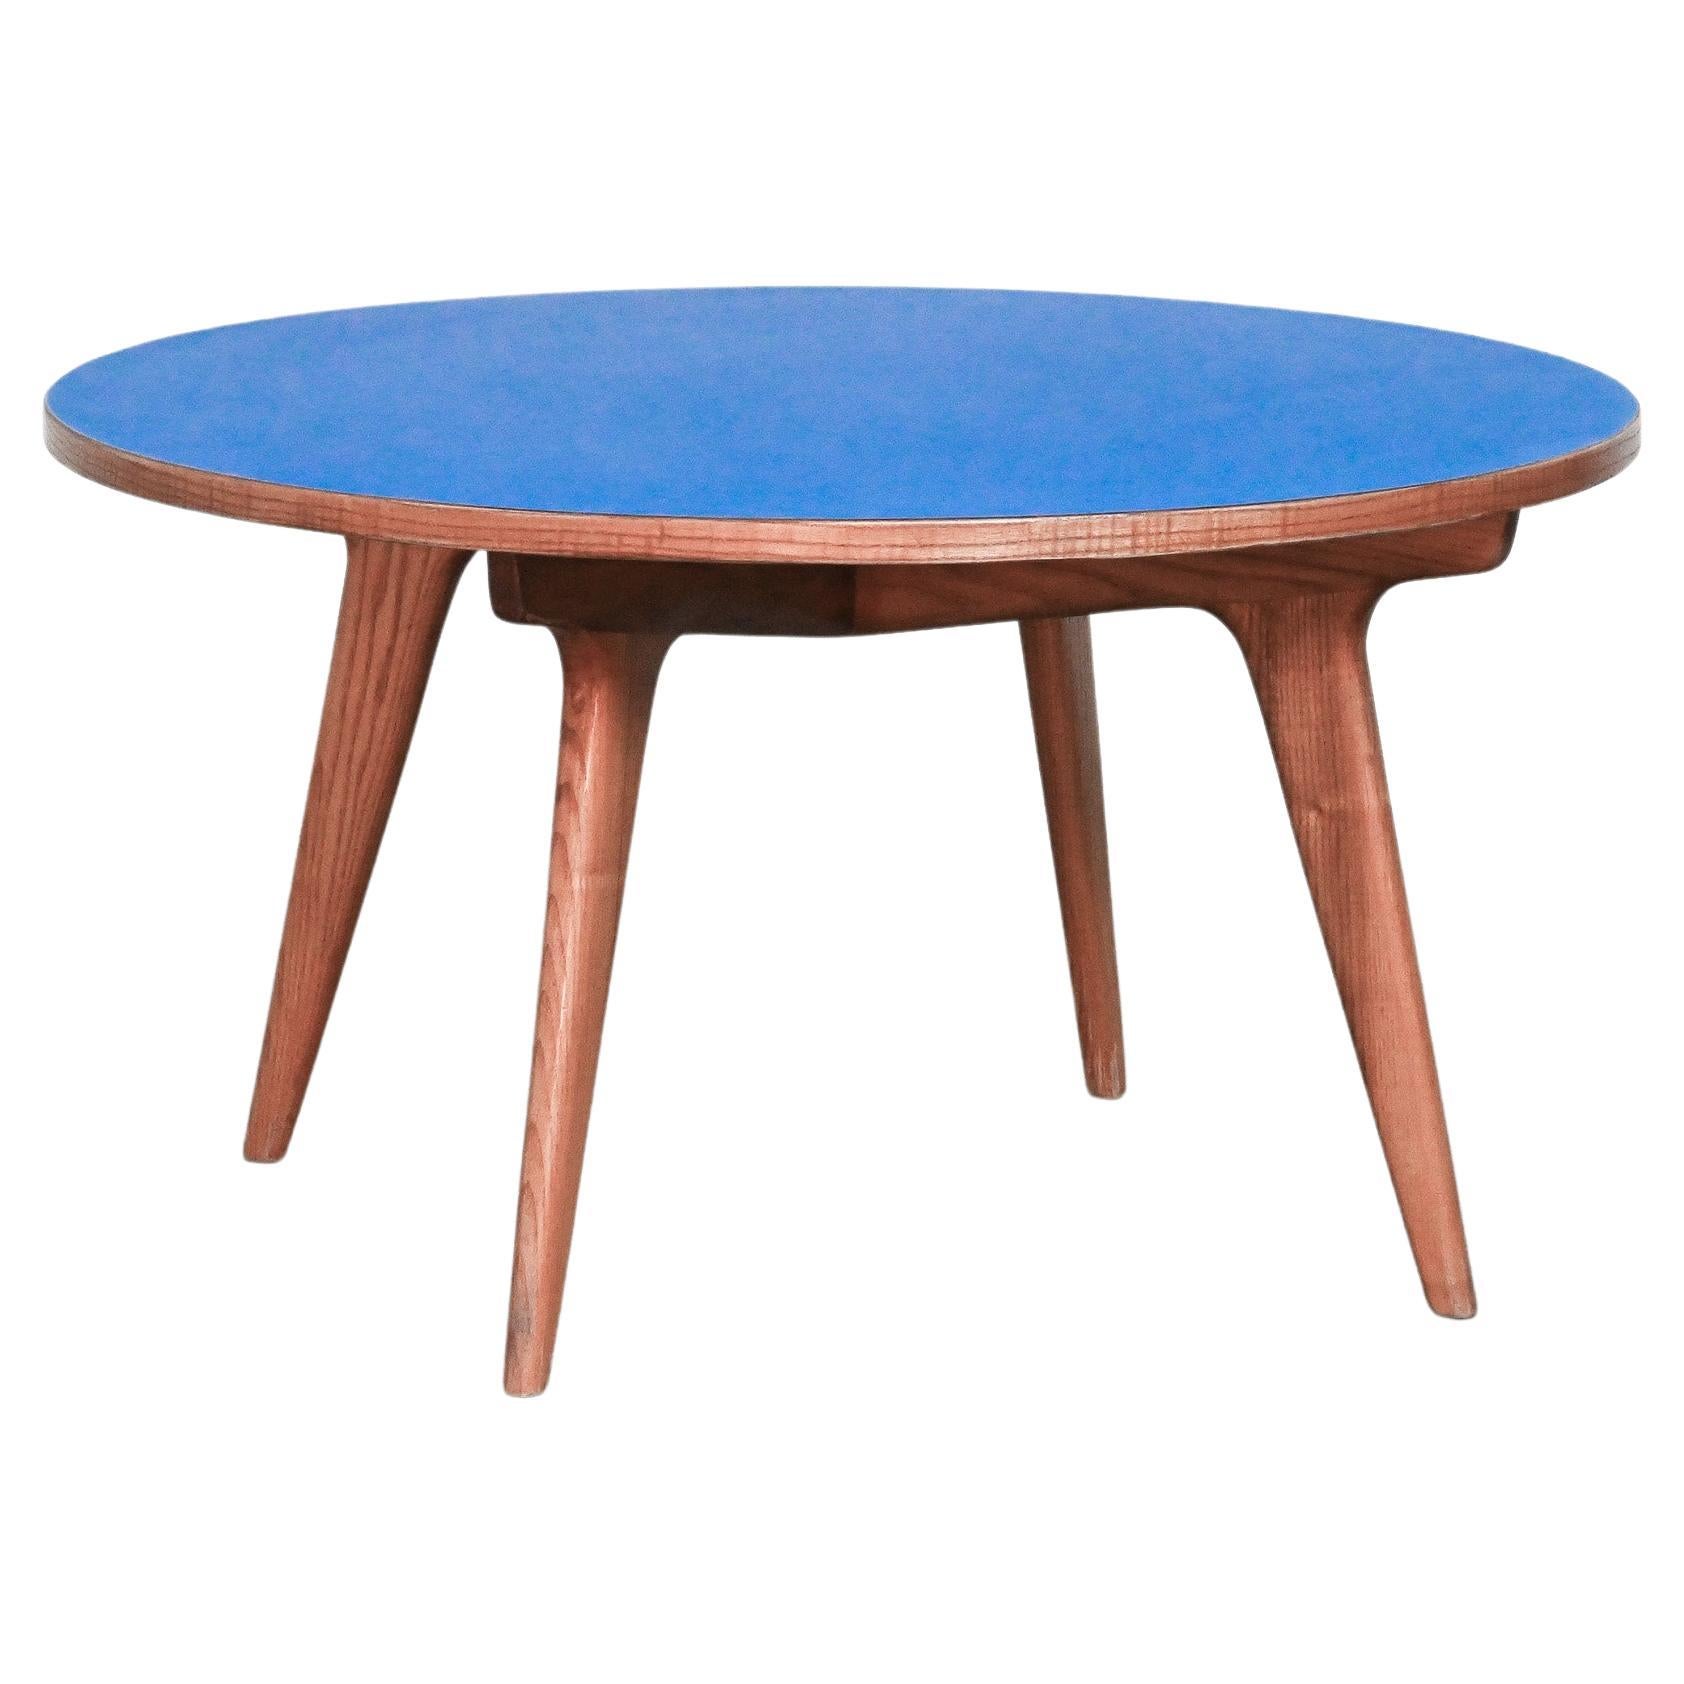 Gio Ponti style Maple and Laminate Circular Low Table For Sale